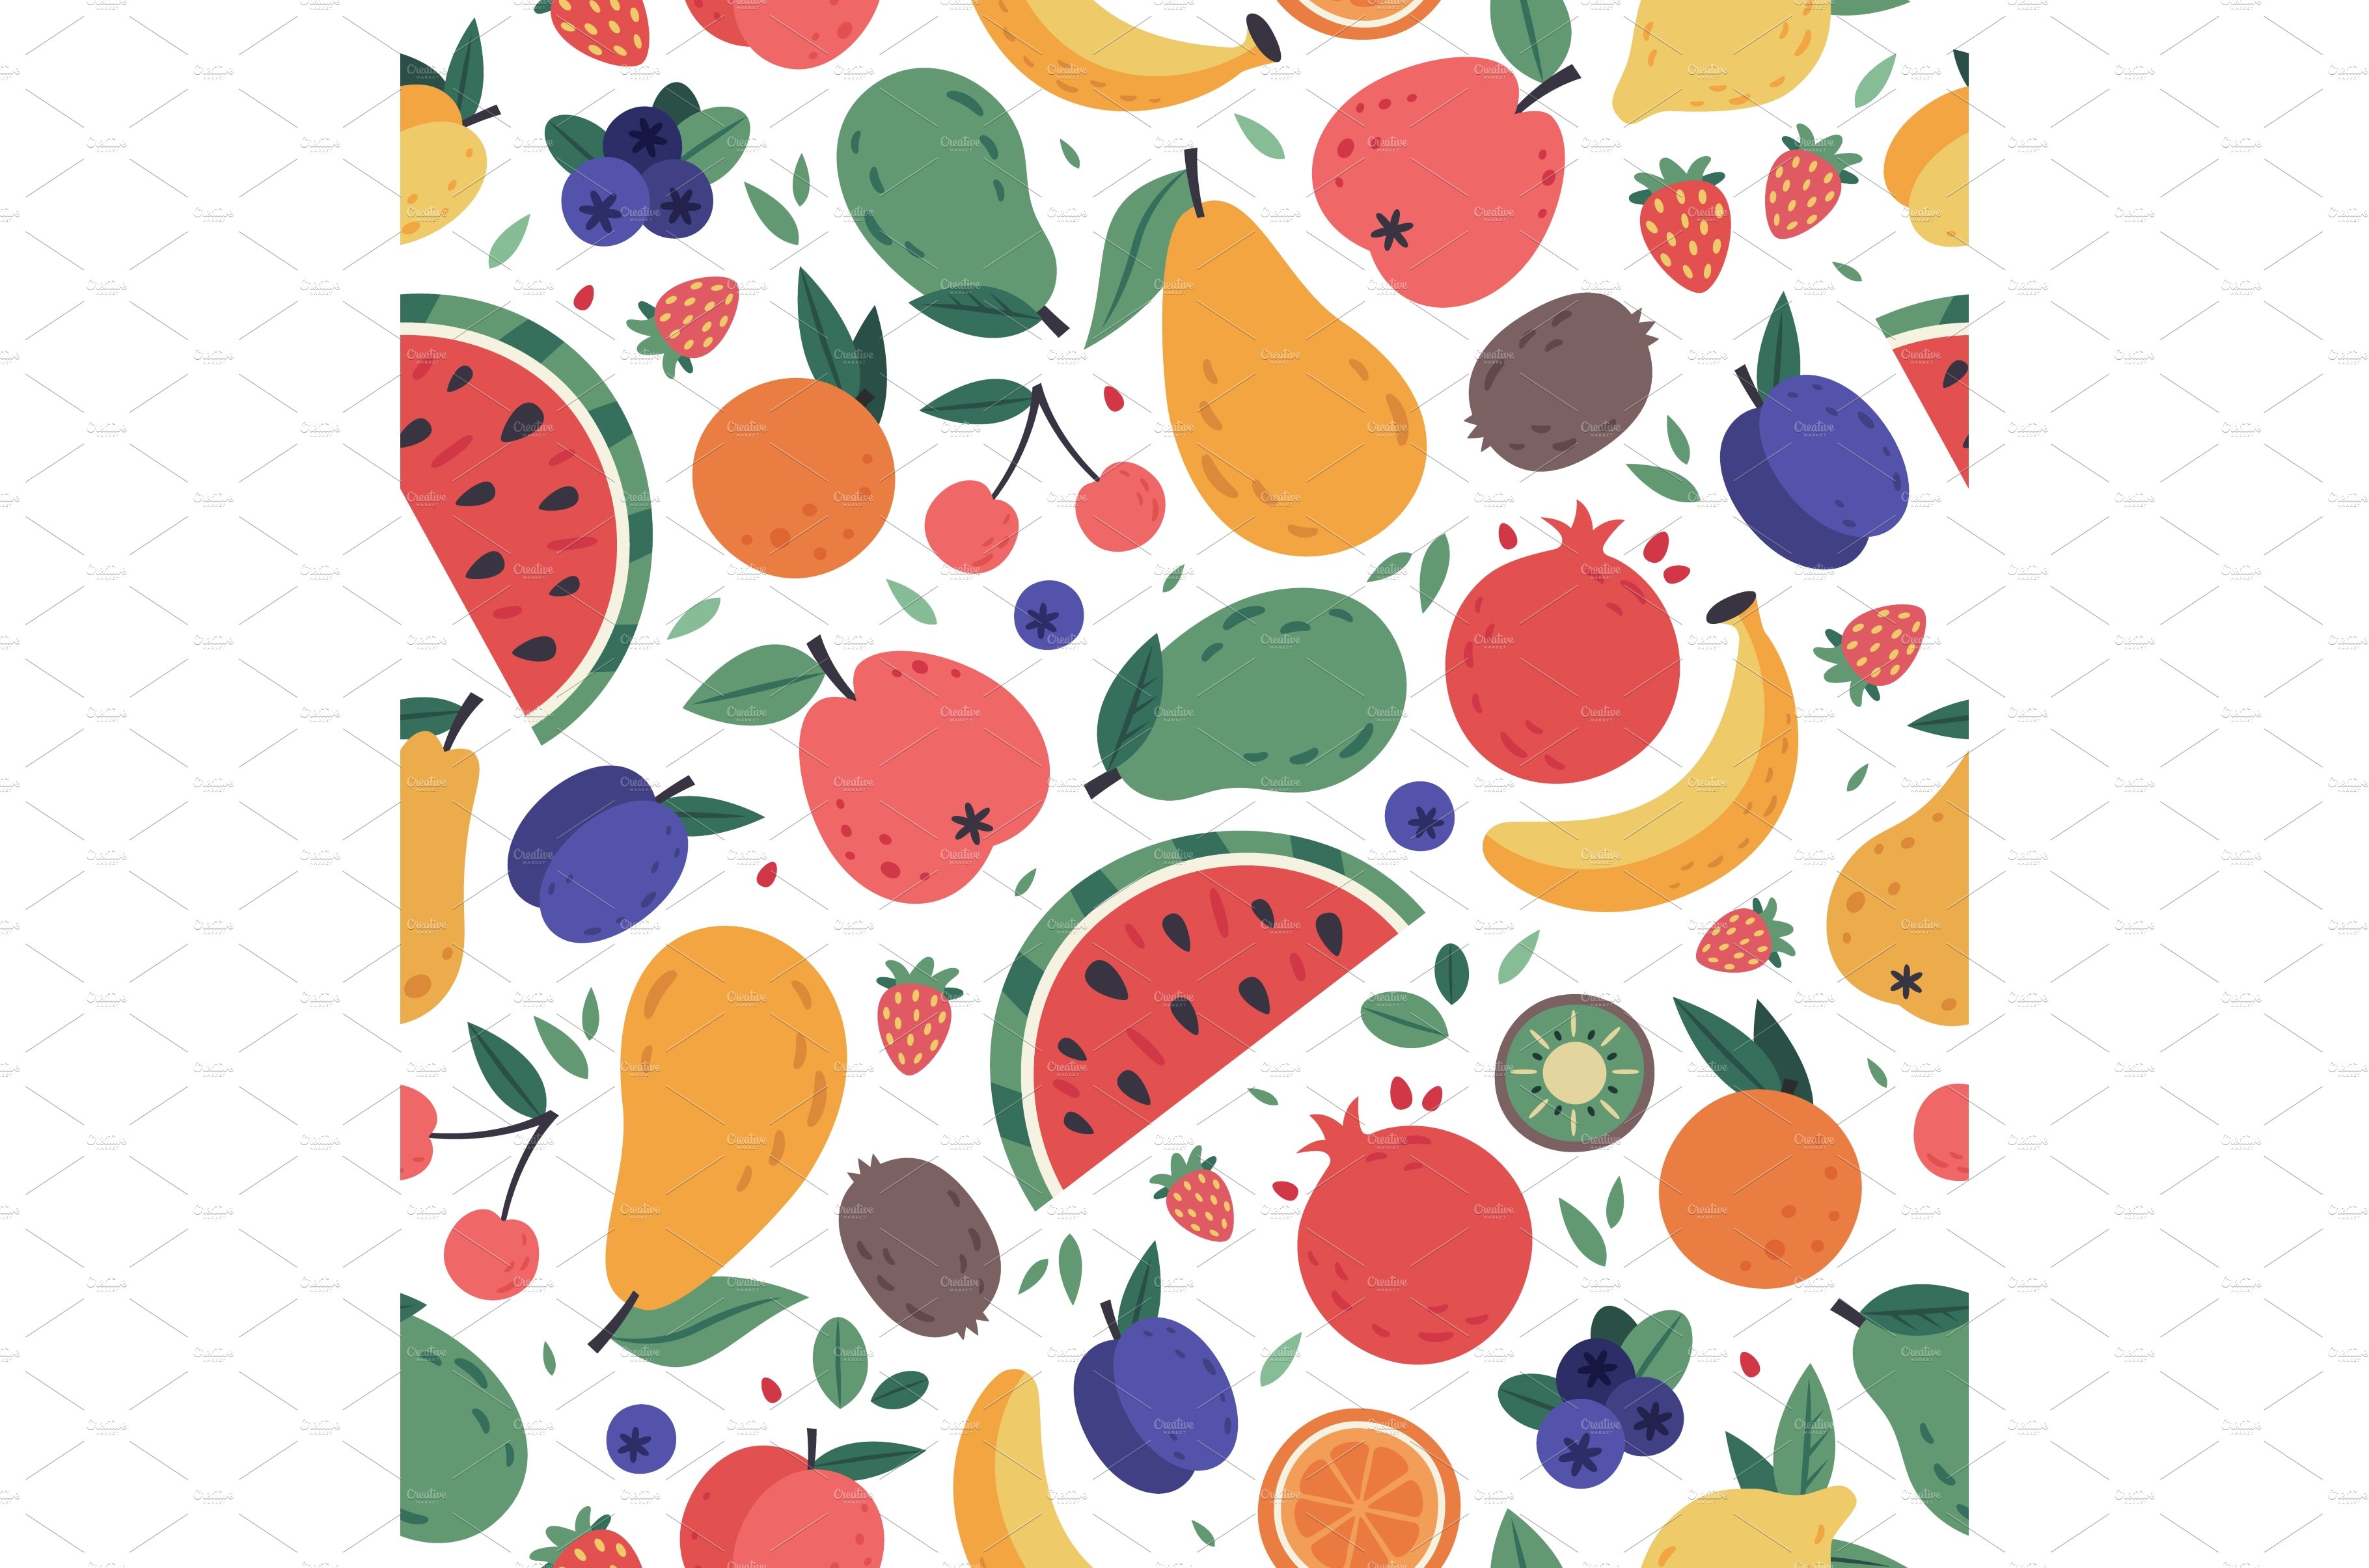 Fruits seamless pattern. Hand drawn cover image.